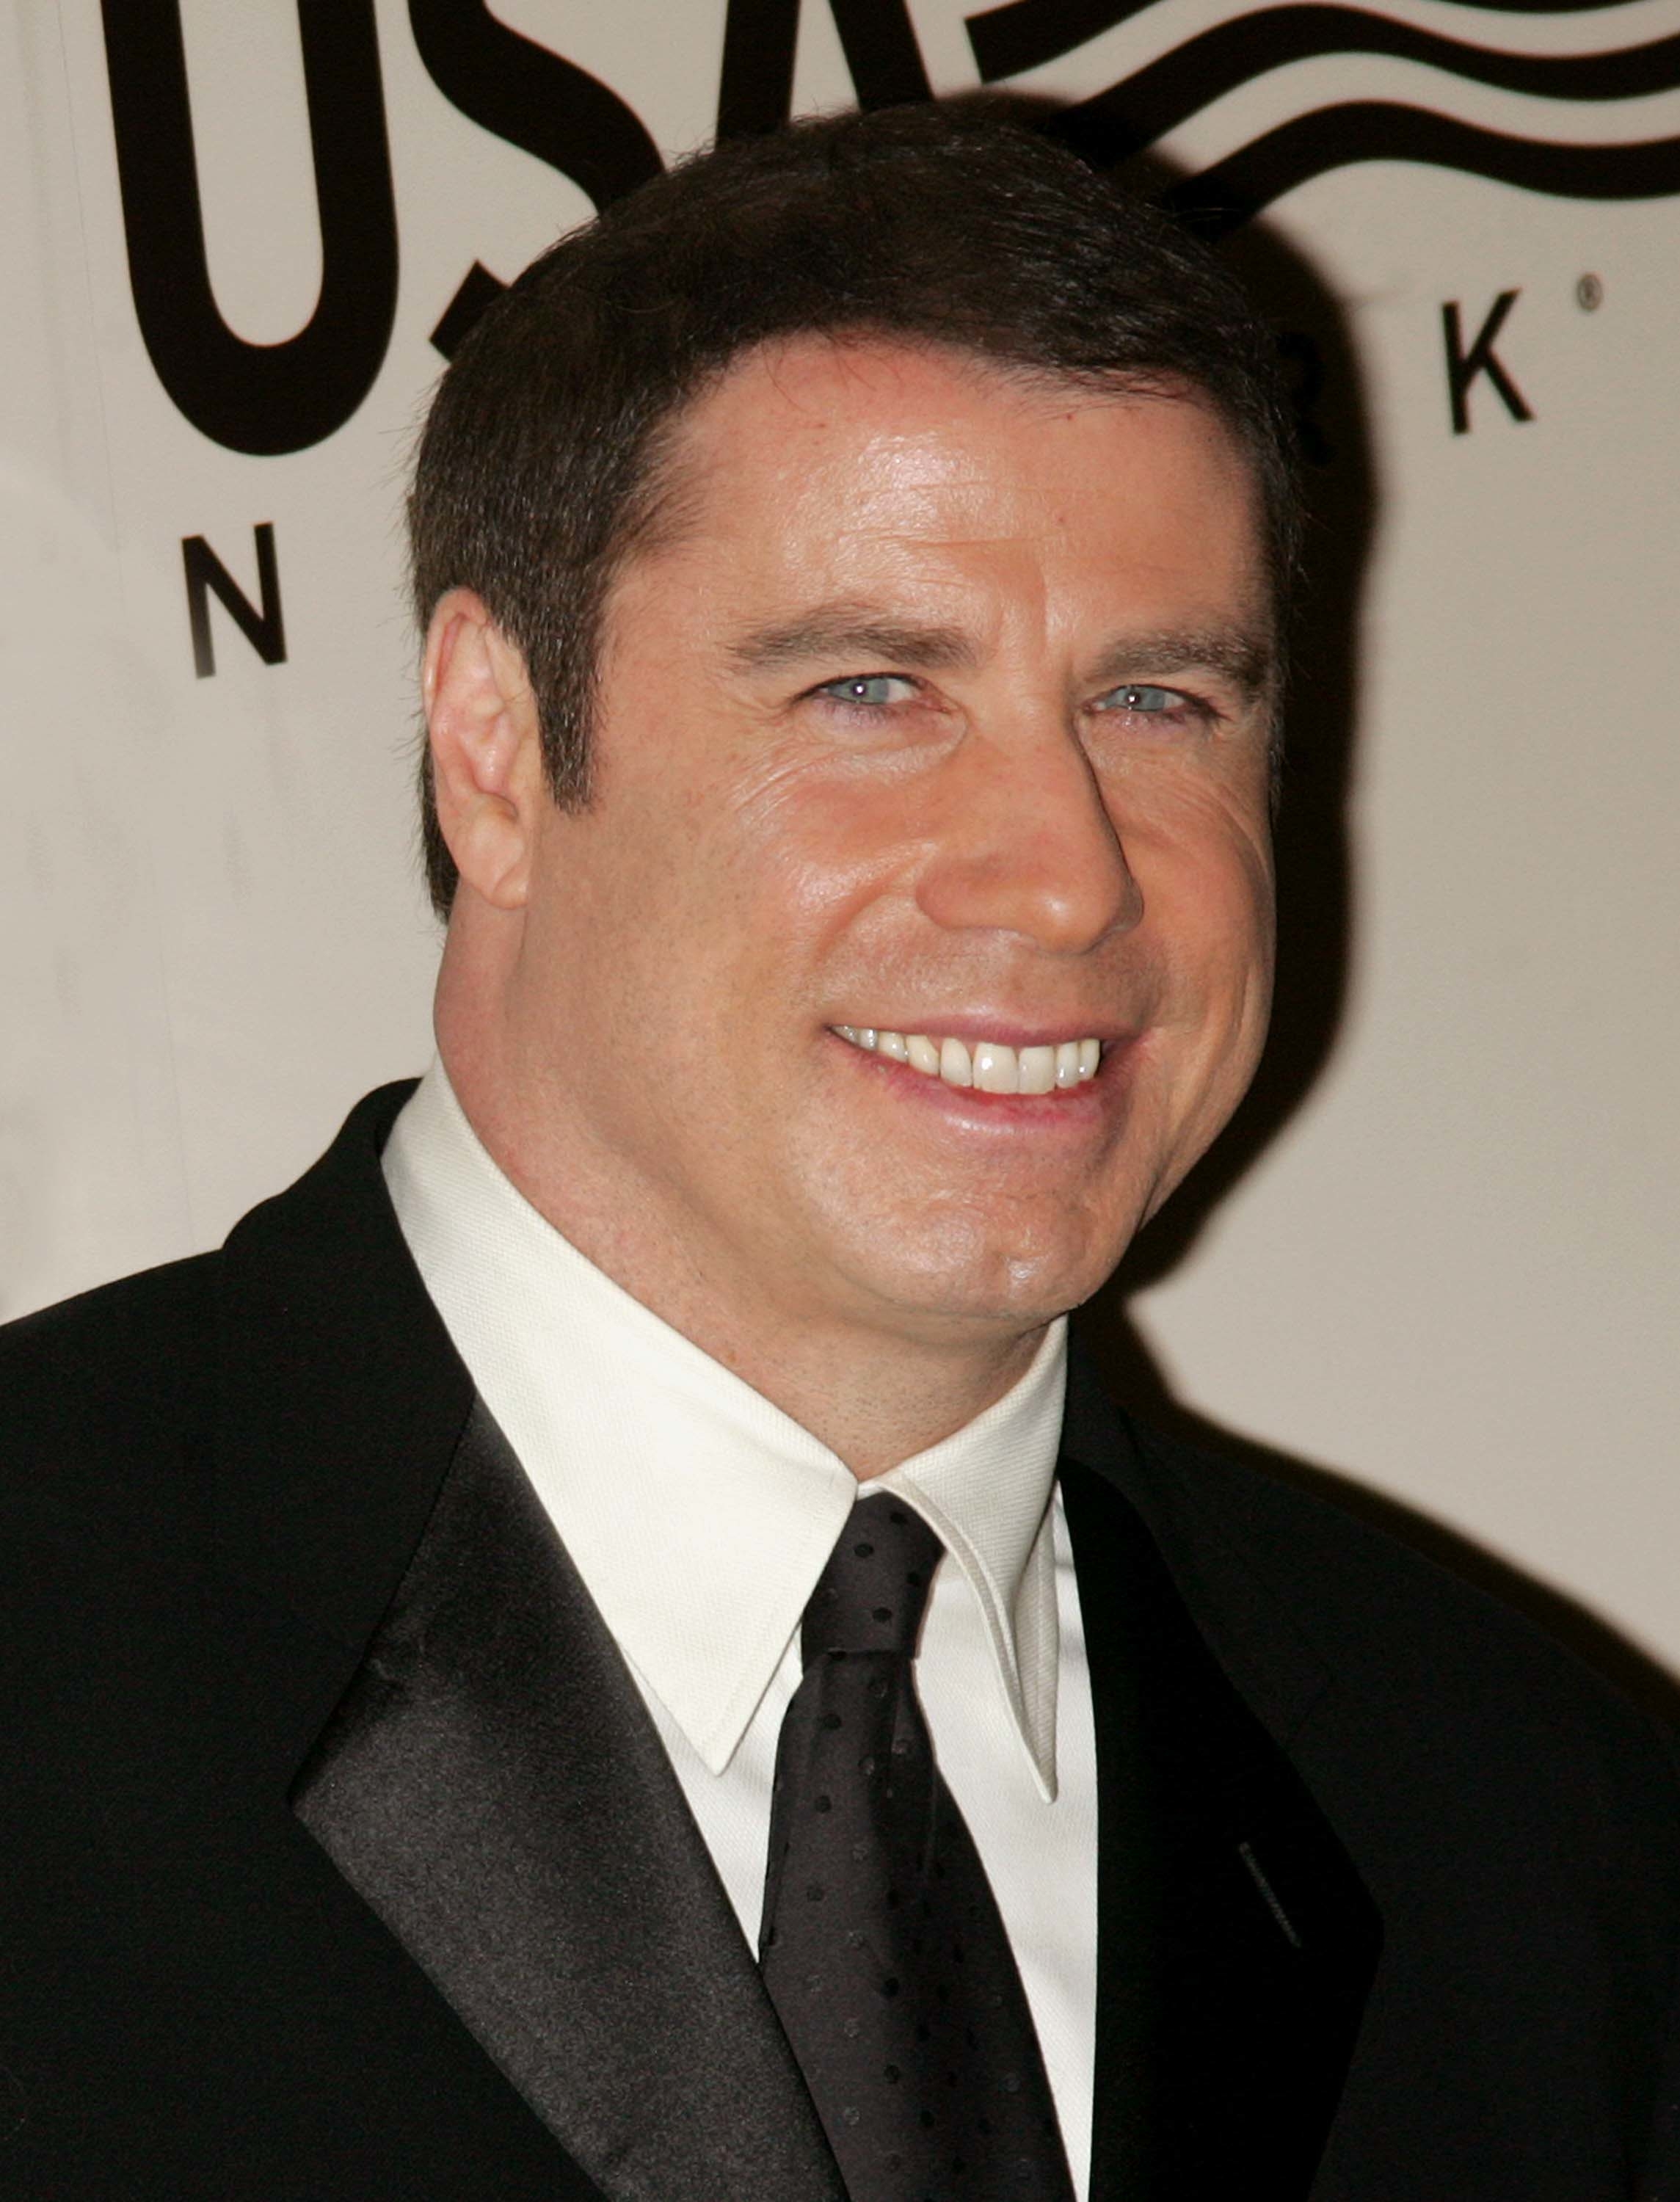 John Travolta smiling in a black suit at a USA Network event